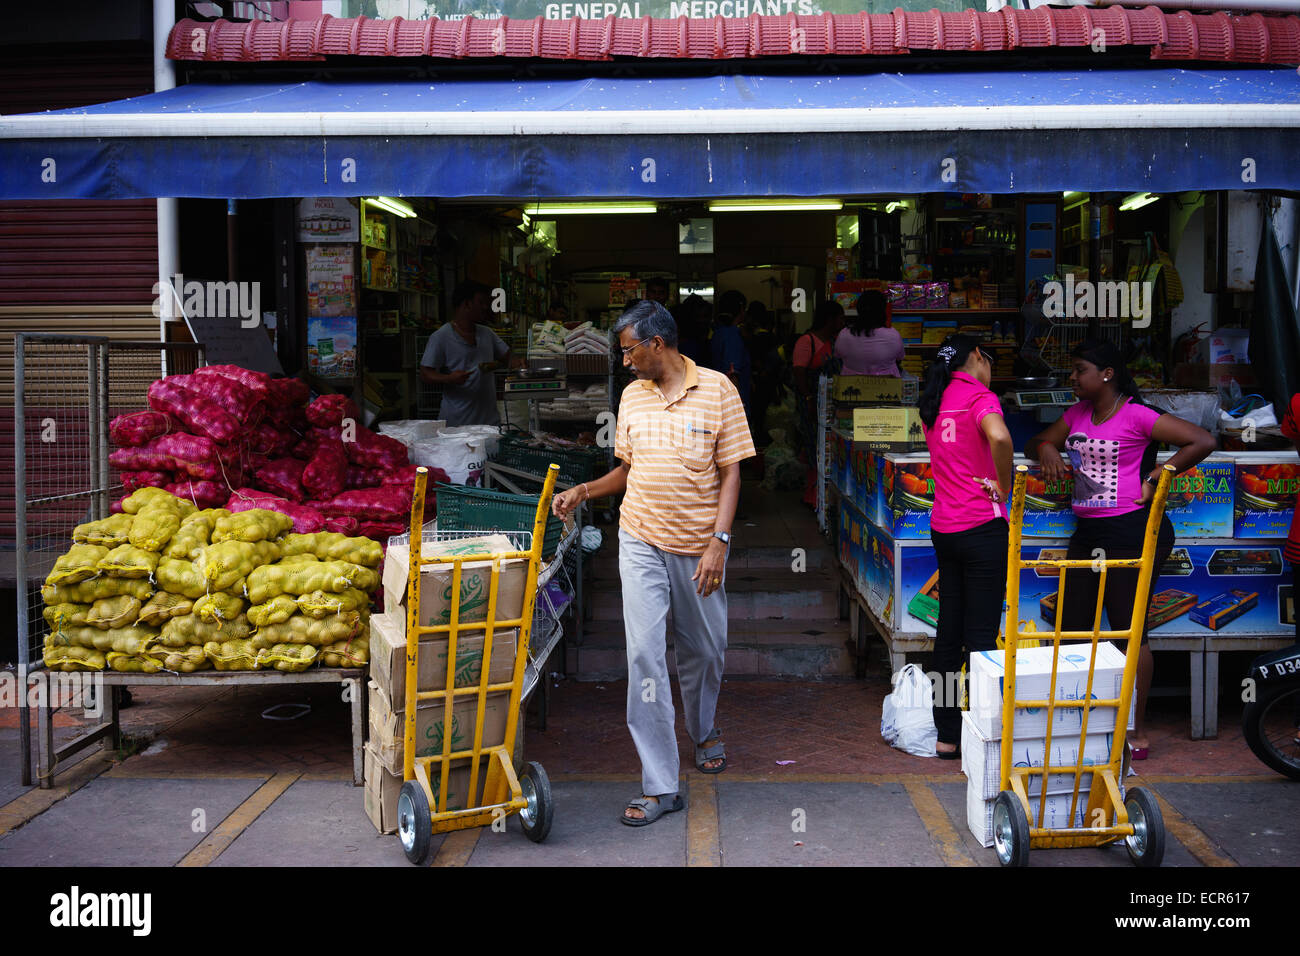 Grocery shop in Little India, George Town, Penang, Malaysia. Stock Photo